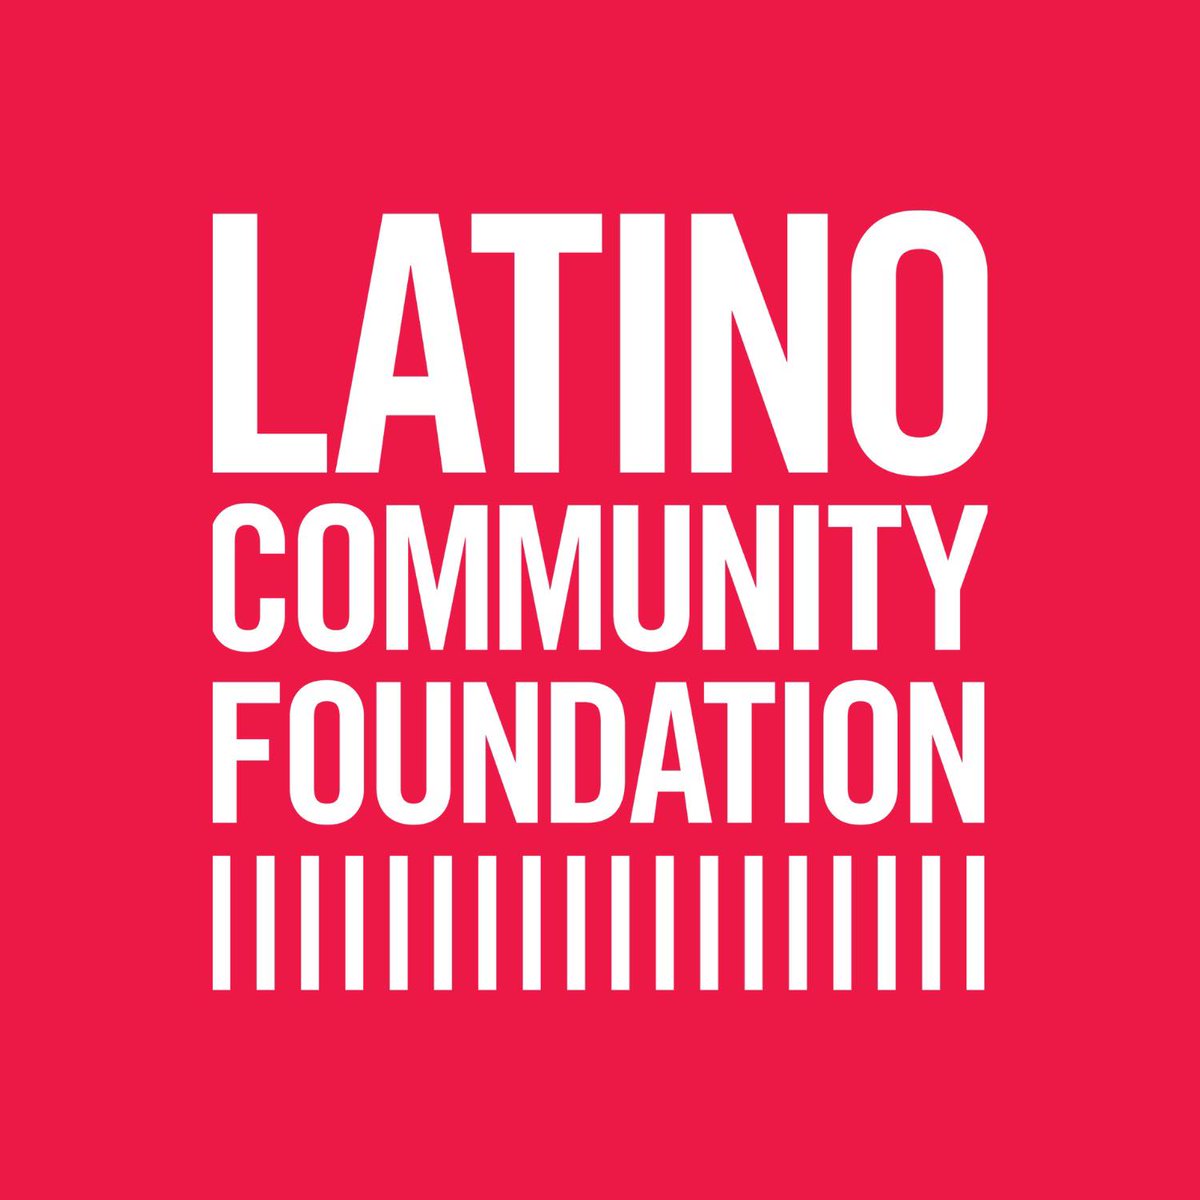 BSP is proud to stand alongside the @LatinoCommFdn & fellow grassroots champions, driving democratic change and empowering communities. The Latino Community Foundation has awarded BSP and other selected nonprofits grants to focus on building the civic & economic power of Latinos.